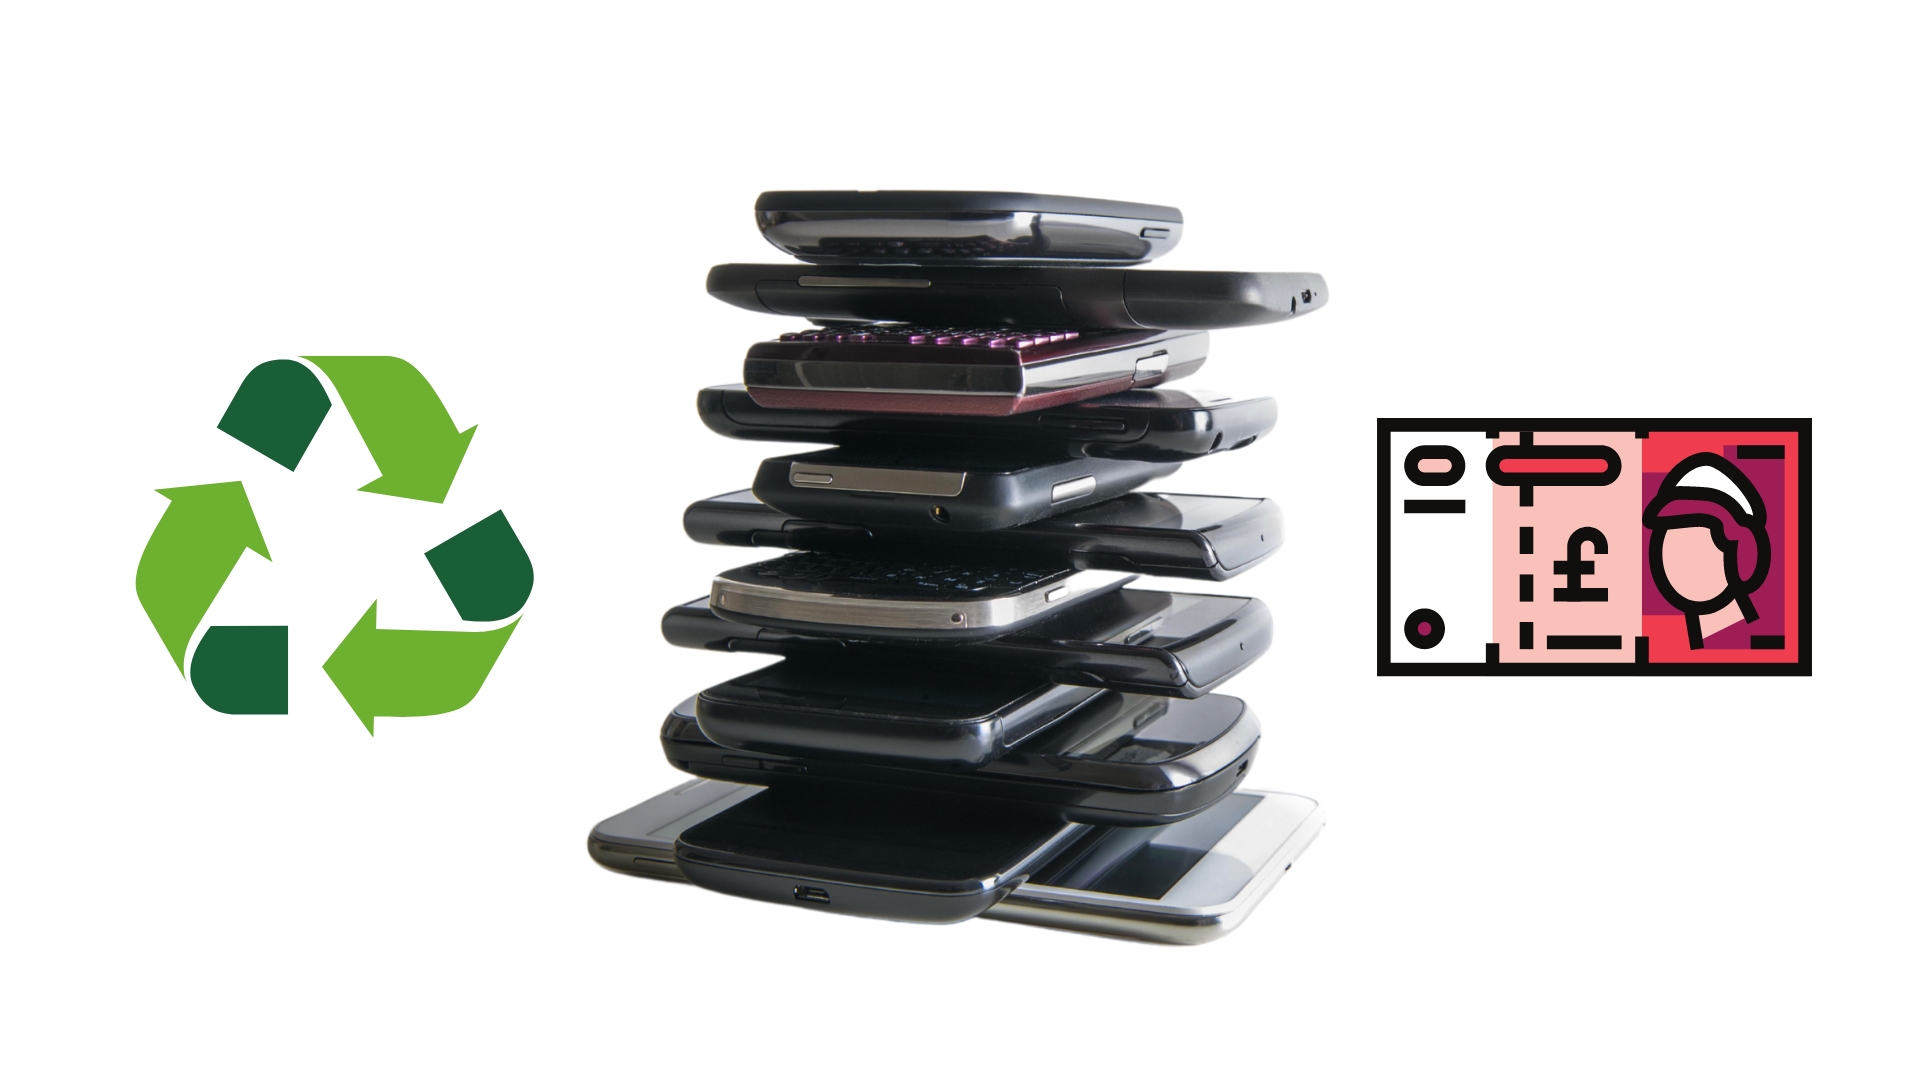 Get paid to recycle your old phone